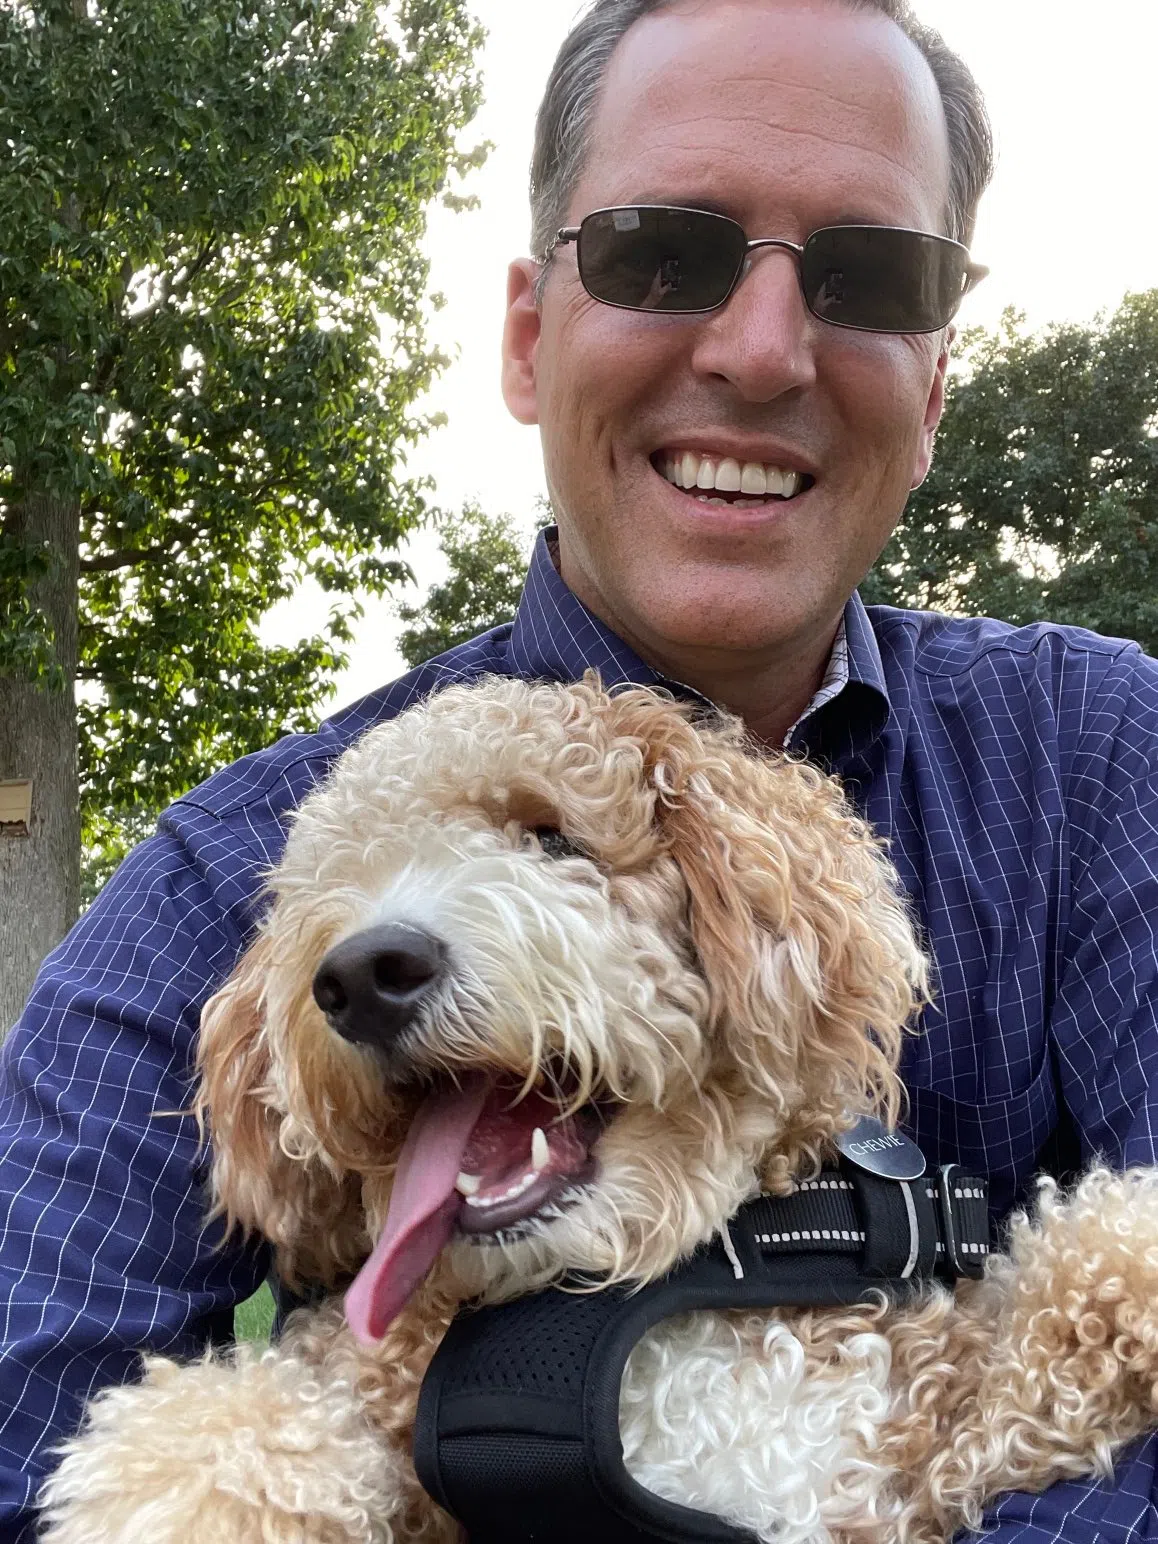 President Comerford poses for a selfie with his dog, Chewie.